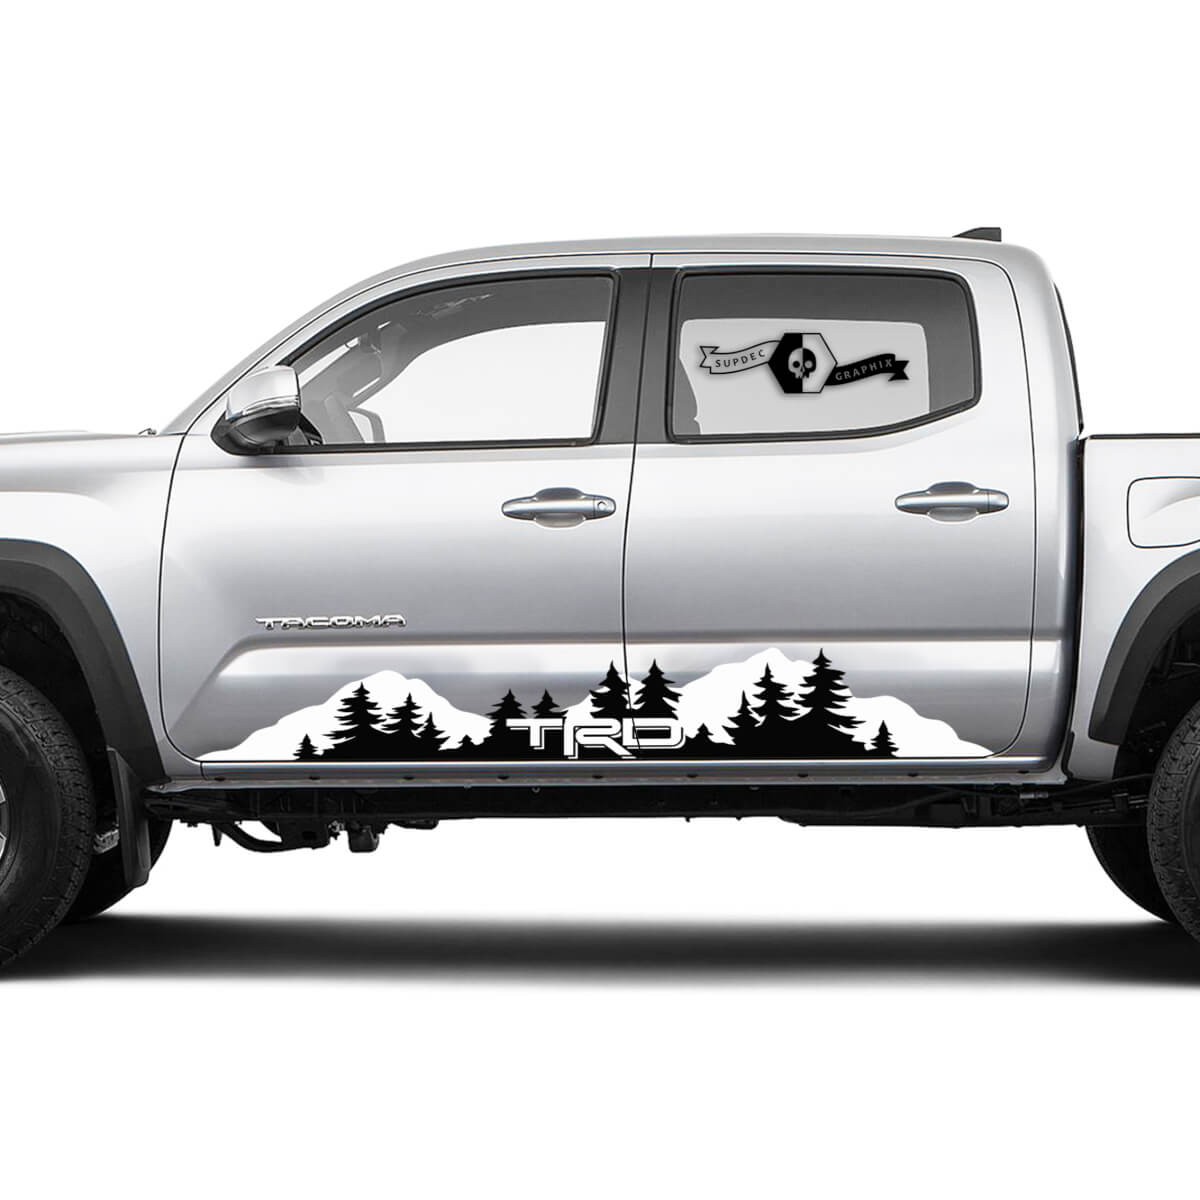 TRD TOYOTA Mountains Decals Stickers for Tacoma Tundra 4Runner Hilux Rocker Panel